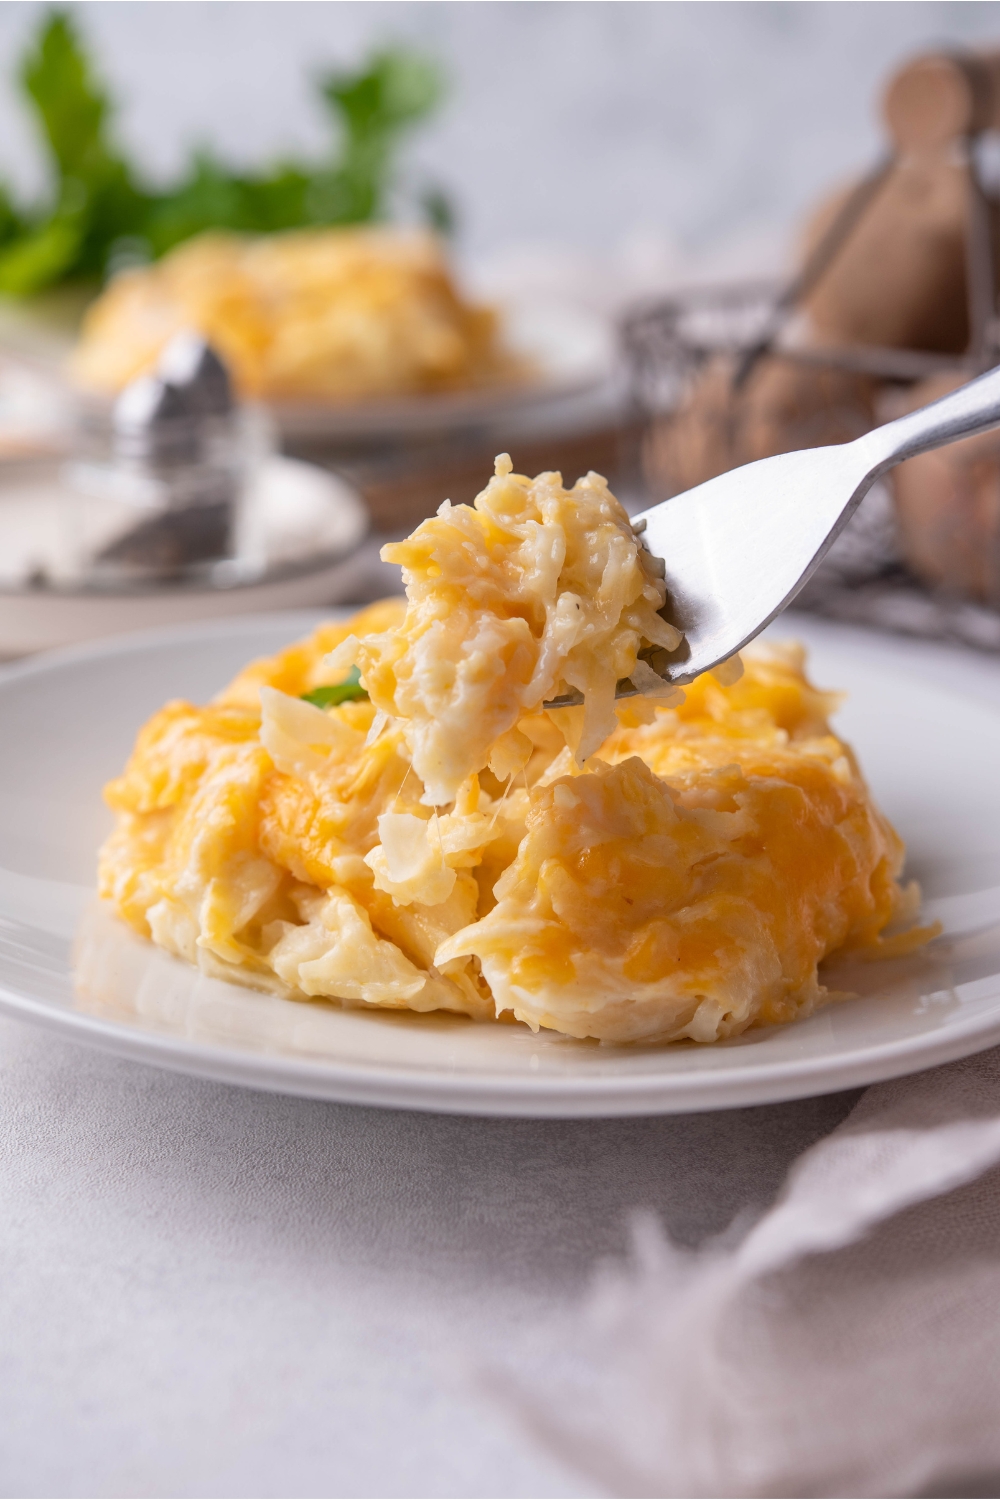 A serving of crockpot cheesy potatoes on a white plate with a fork holding a bite of cheesy potatoes.